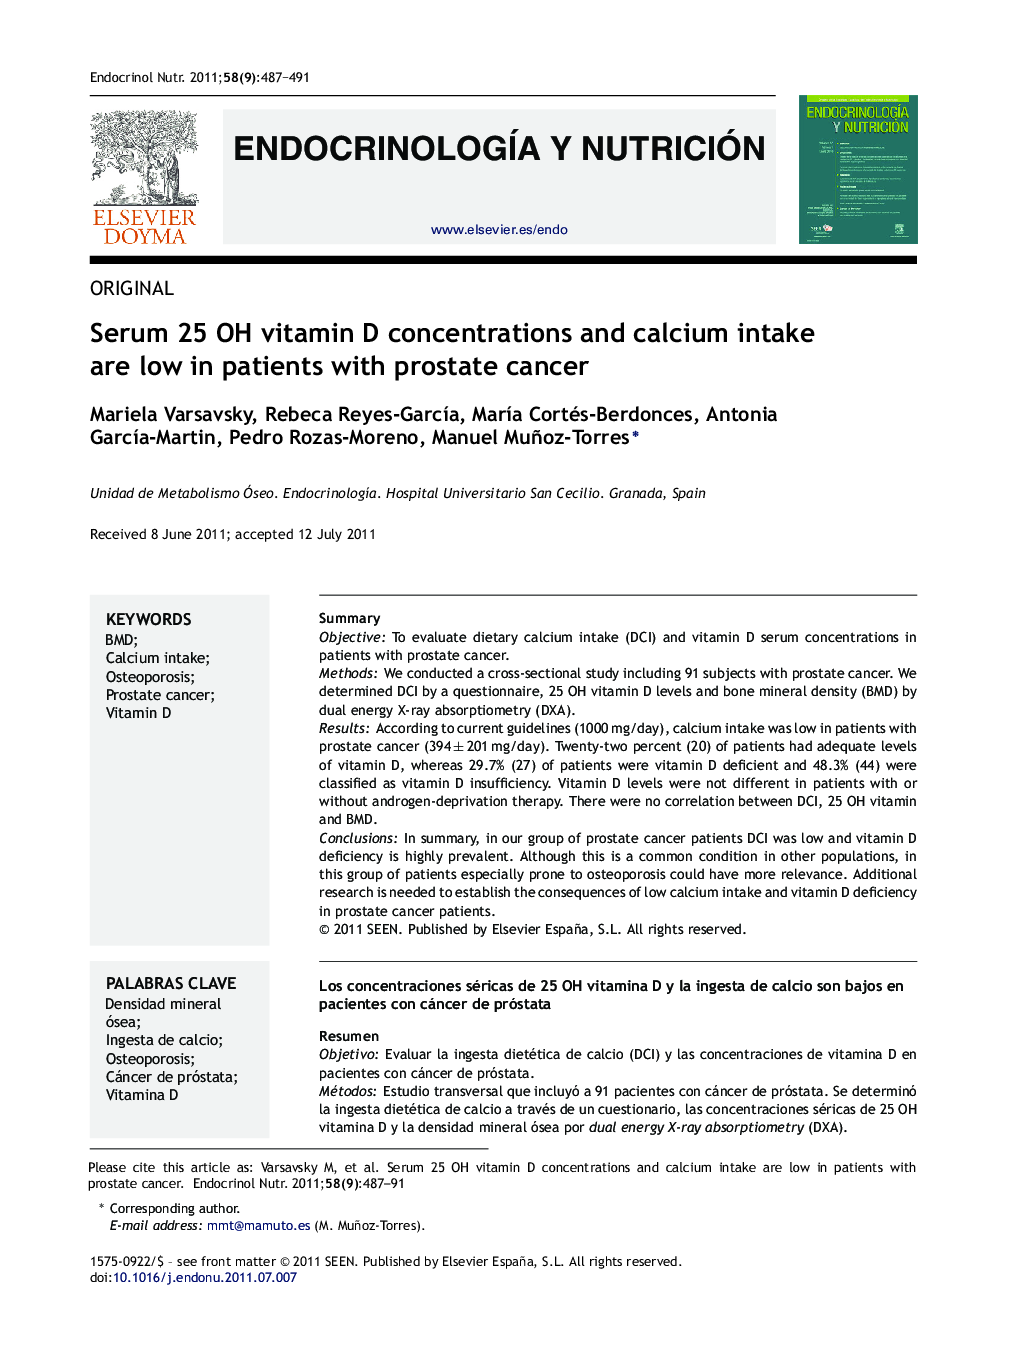 Serum 25 OH vitamin D concentrations and calcium intake are low in patients with prostate cancer 